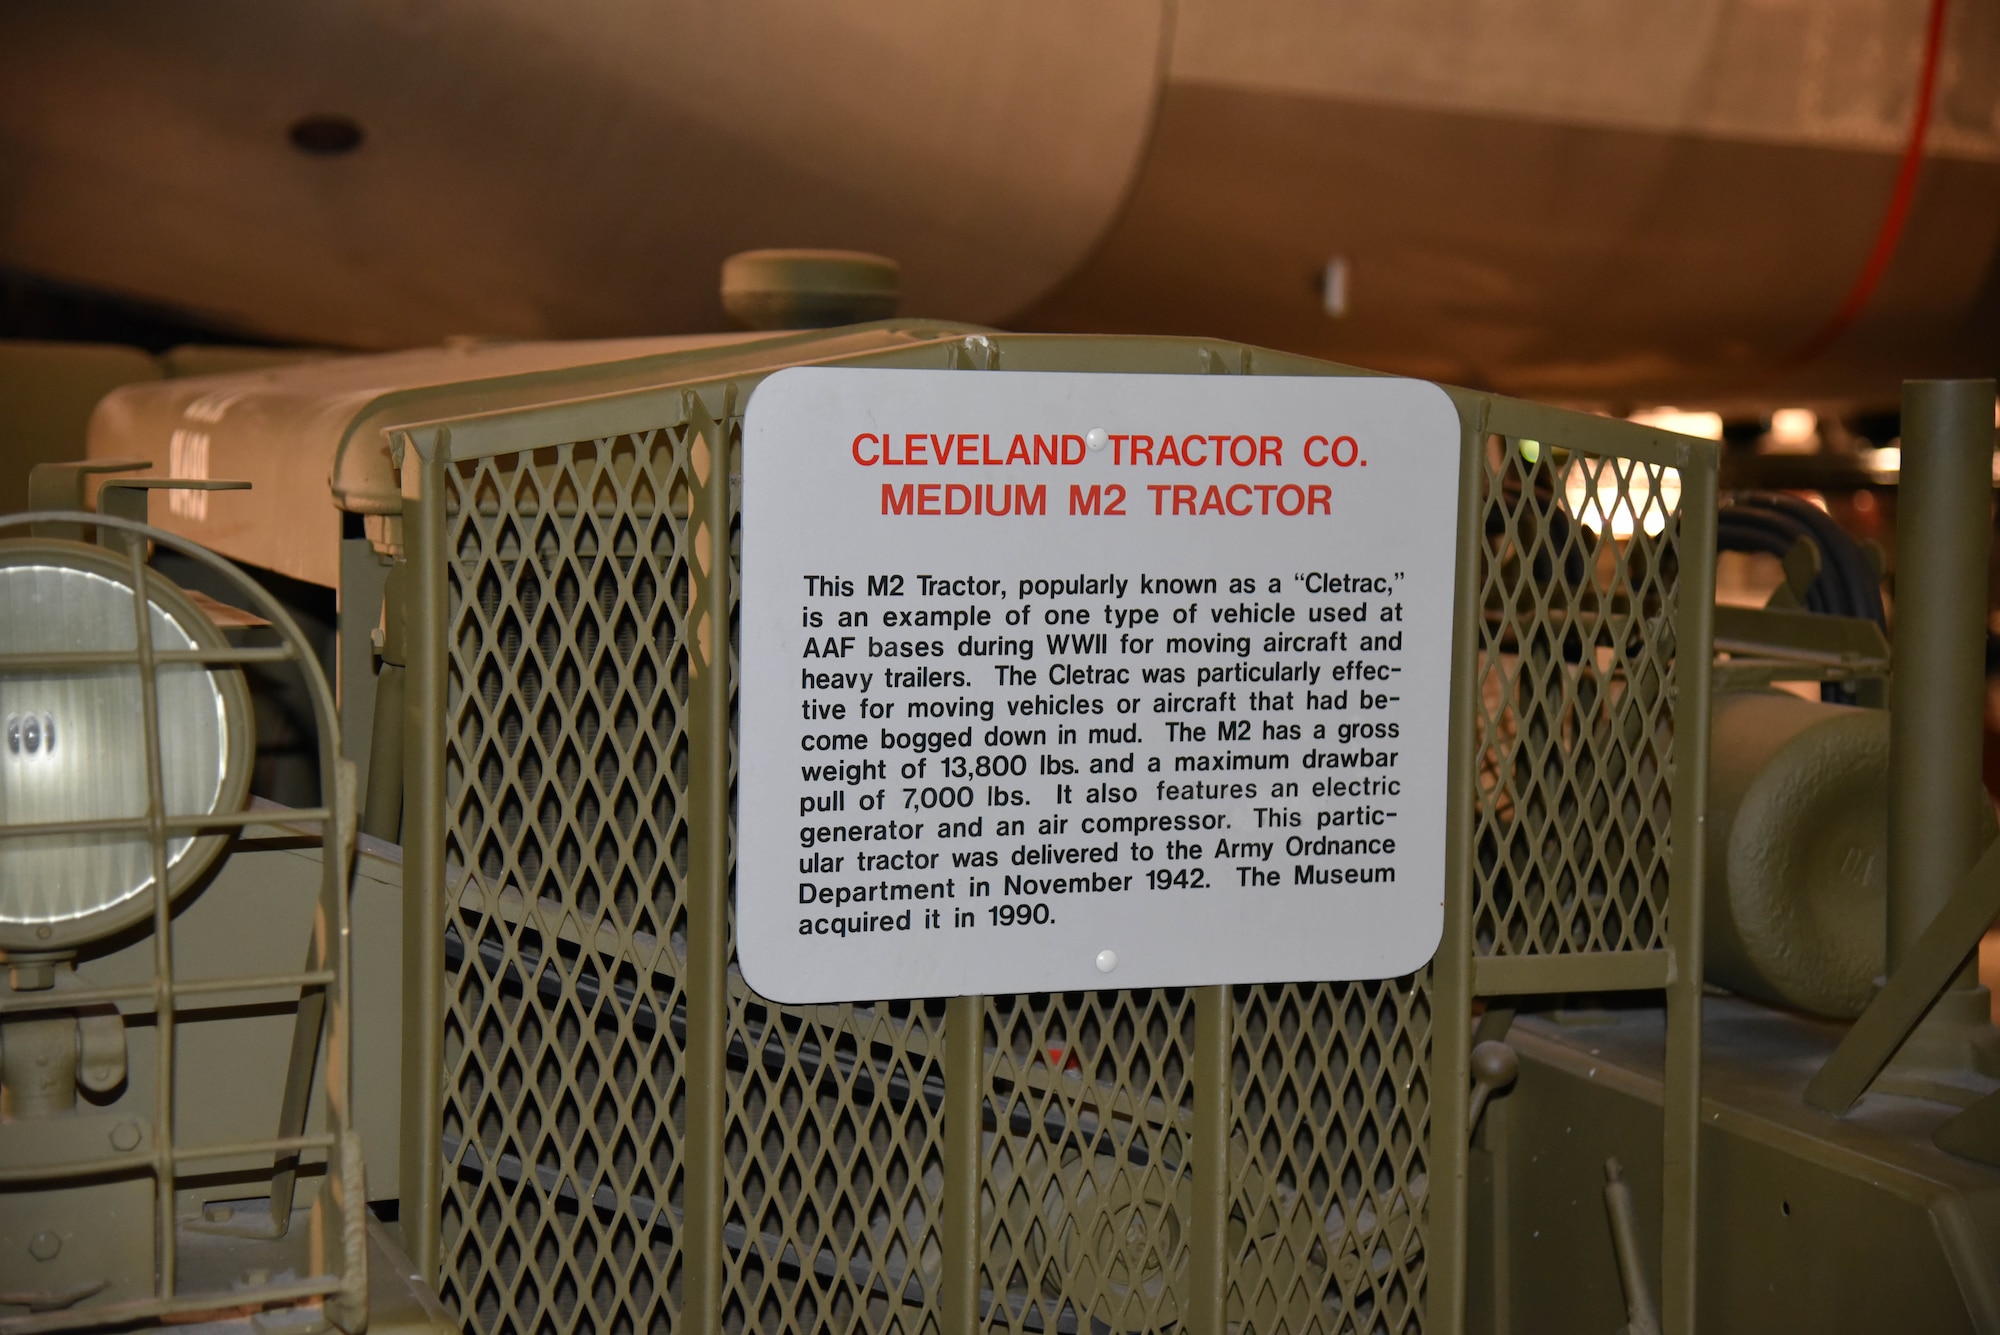 DAYTON, Ohio - Cleveland Tractor Co. Medium M2 Tractor on display in the Korean War Gallery at the National Museum of the U.S. Air Force. (U.S. Air Force photo by Ken LaRock)